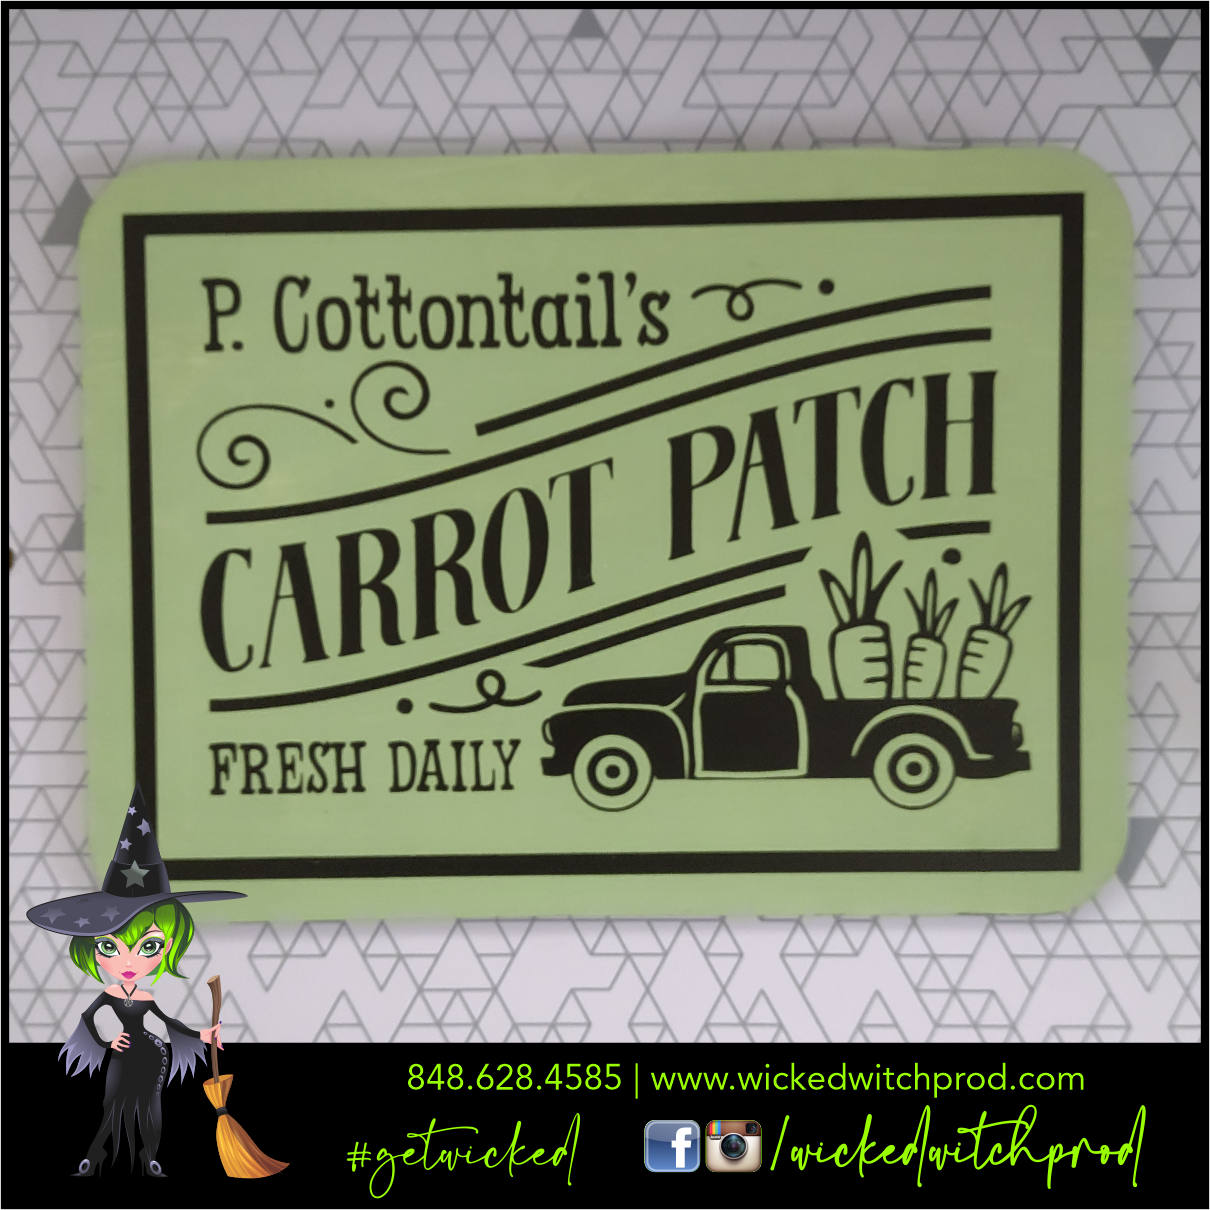 P. Cottontail's Carrot Patch Wooden Sign